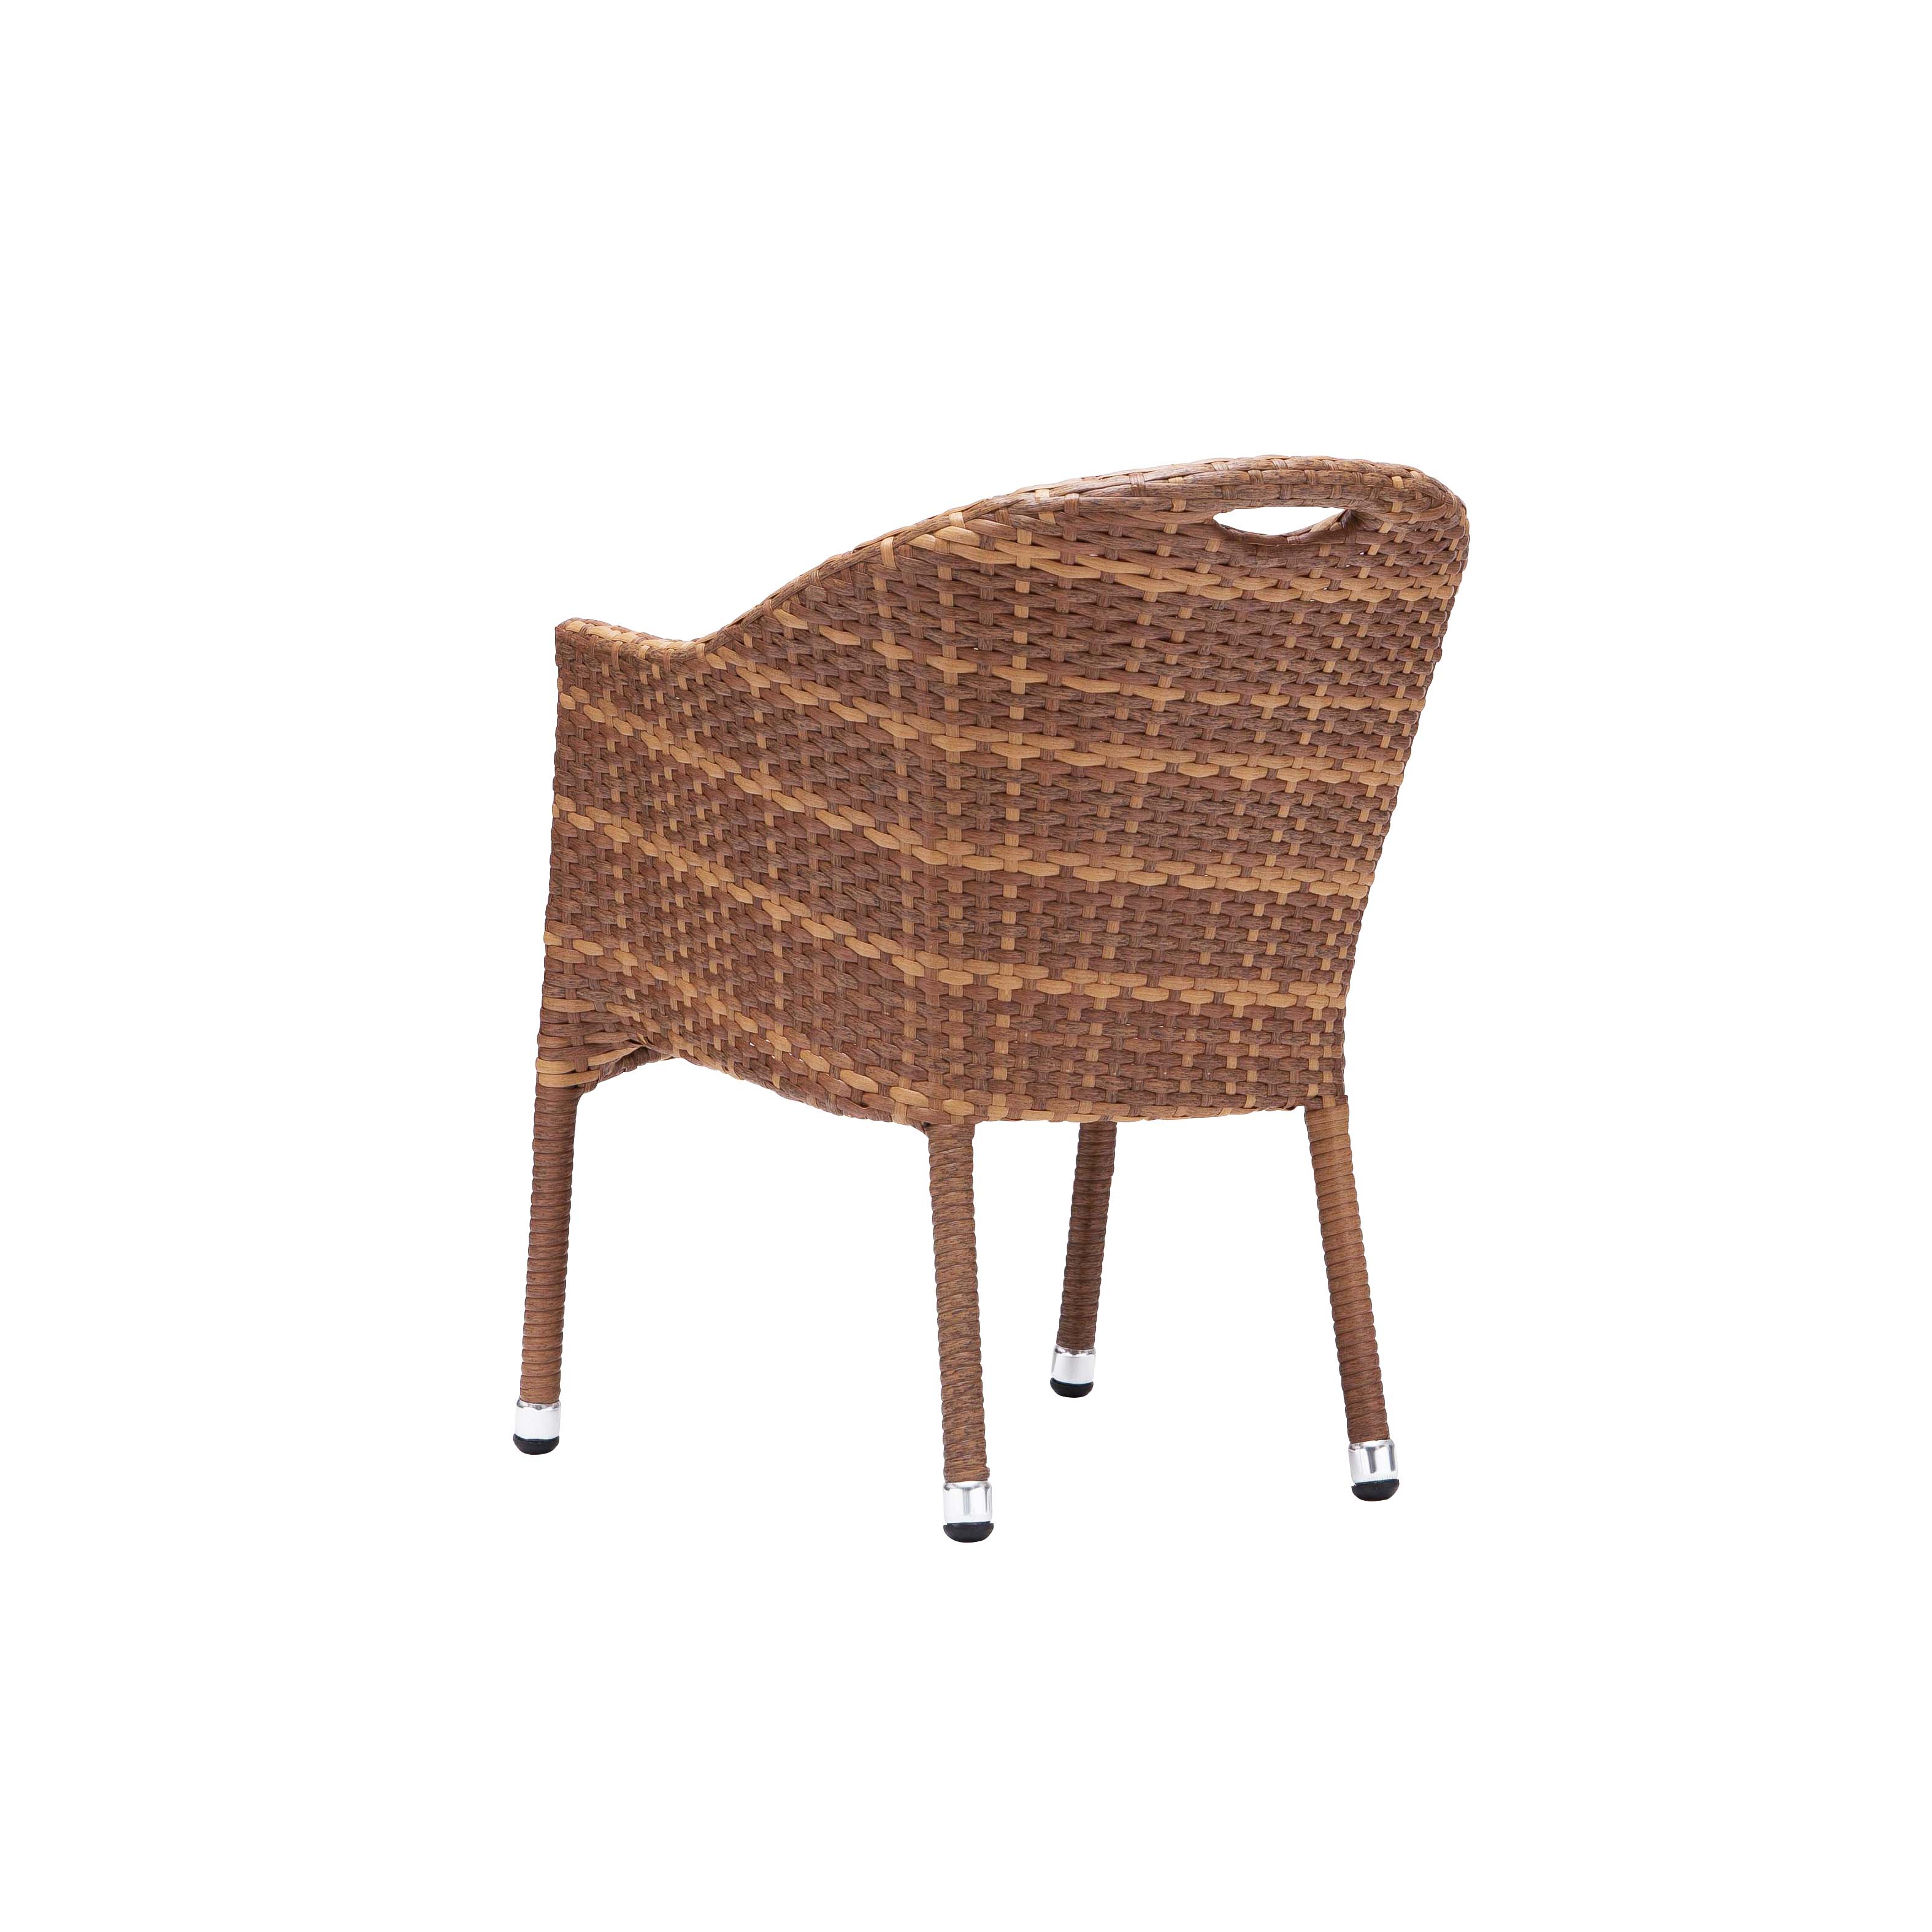 Angus dining chair S3